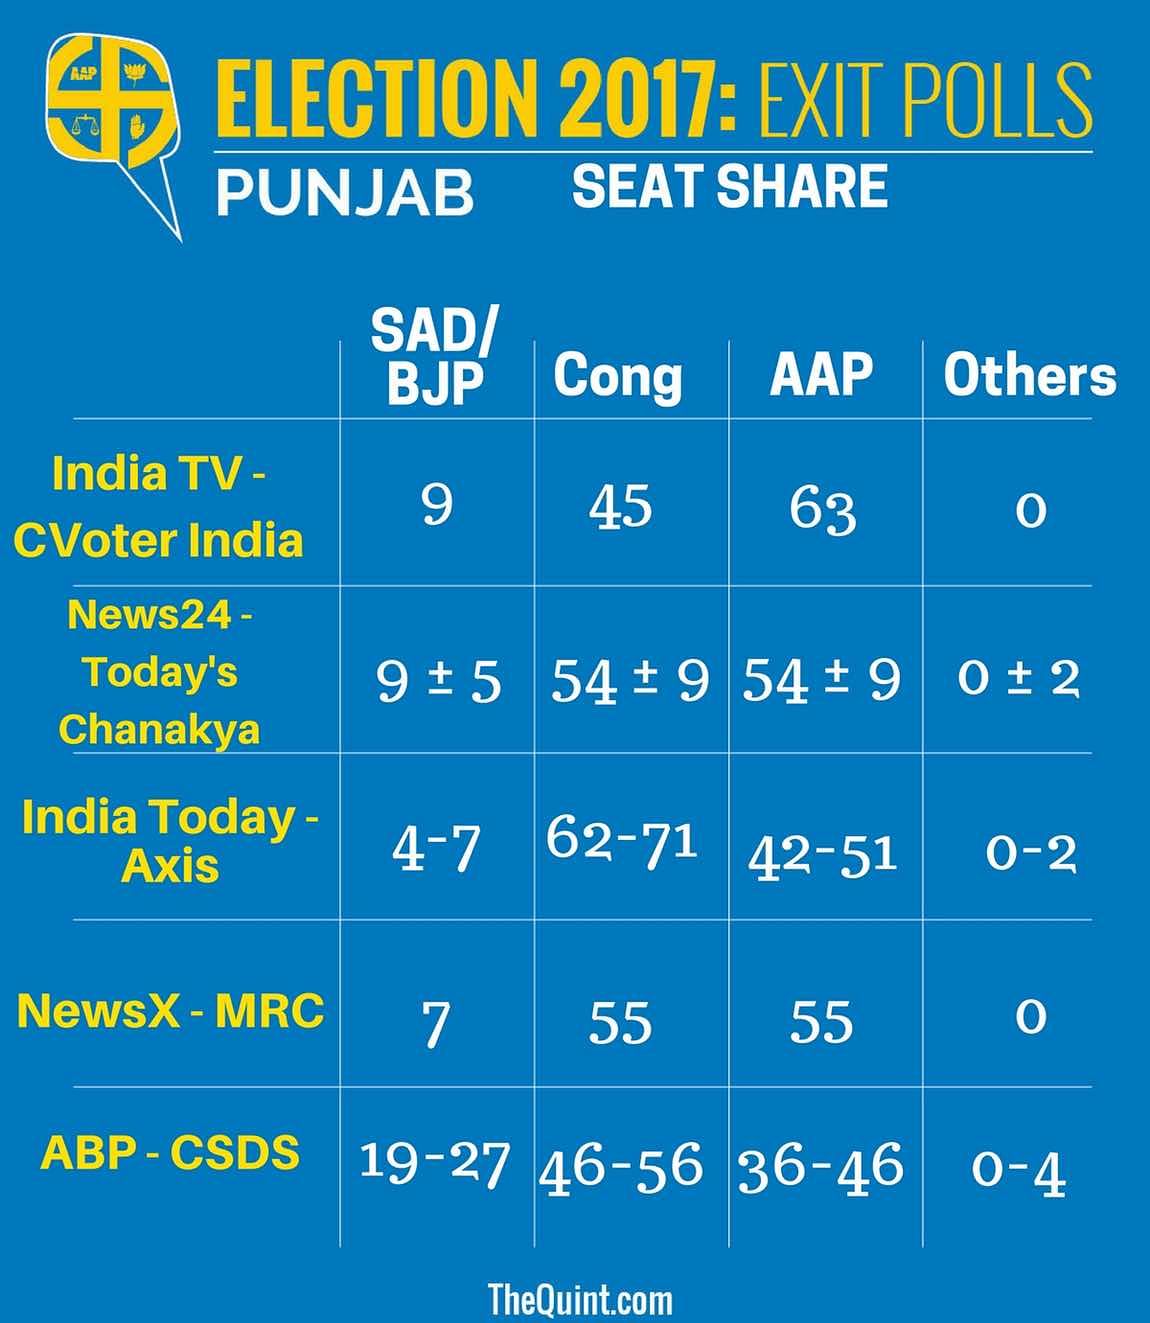 Read all the exit poll predictions for the five states and 690 seats.